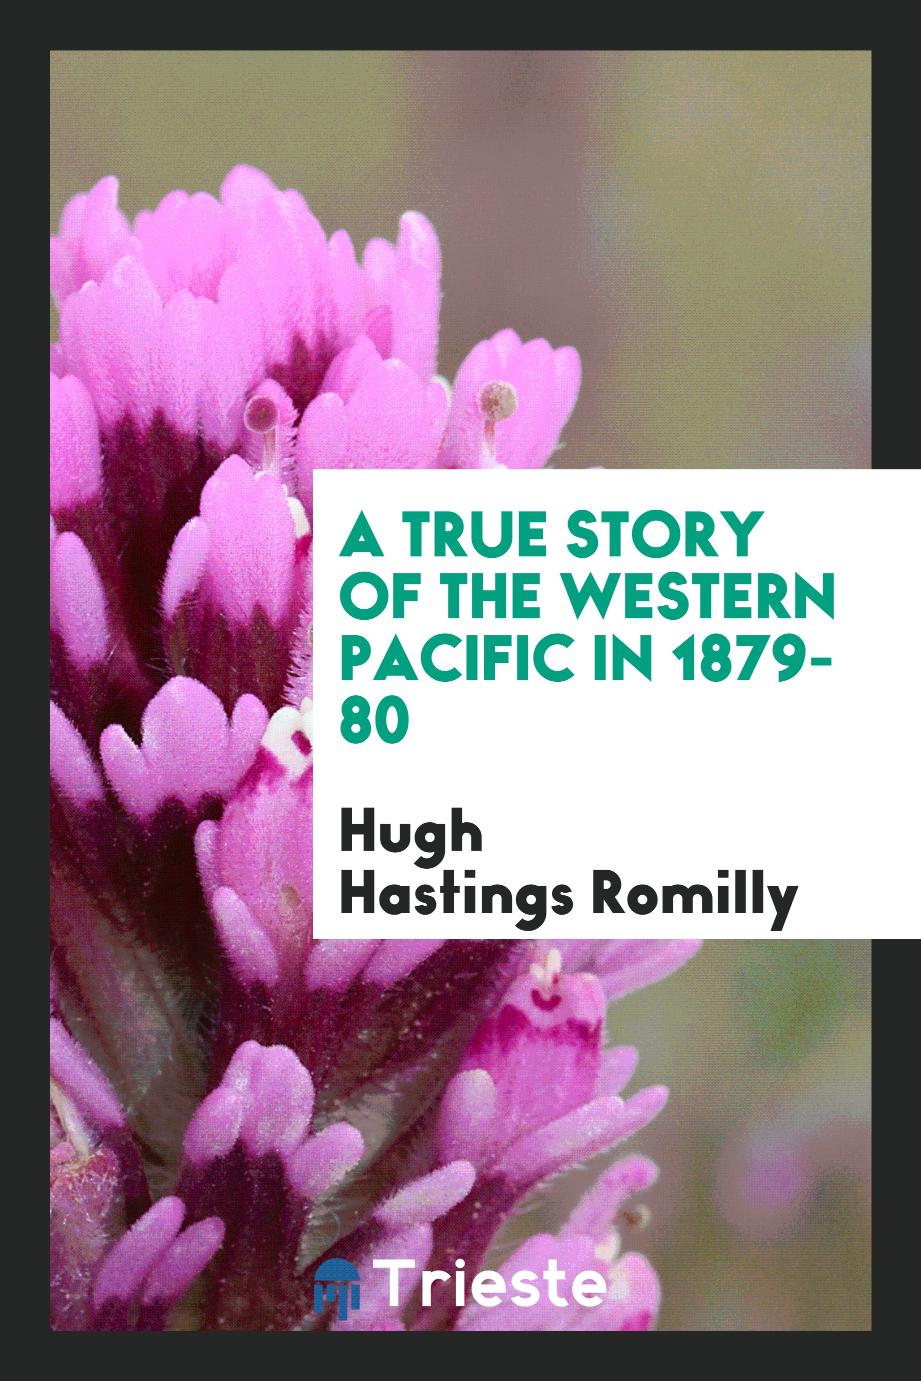 A true story of the Western Pacific in 1879-80